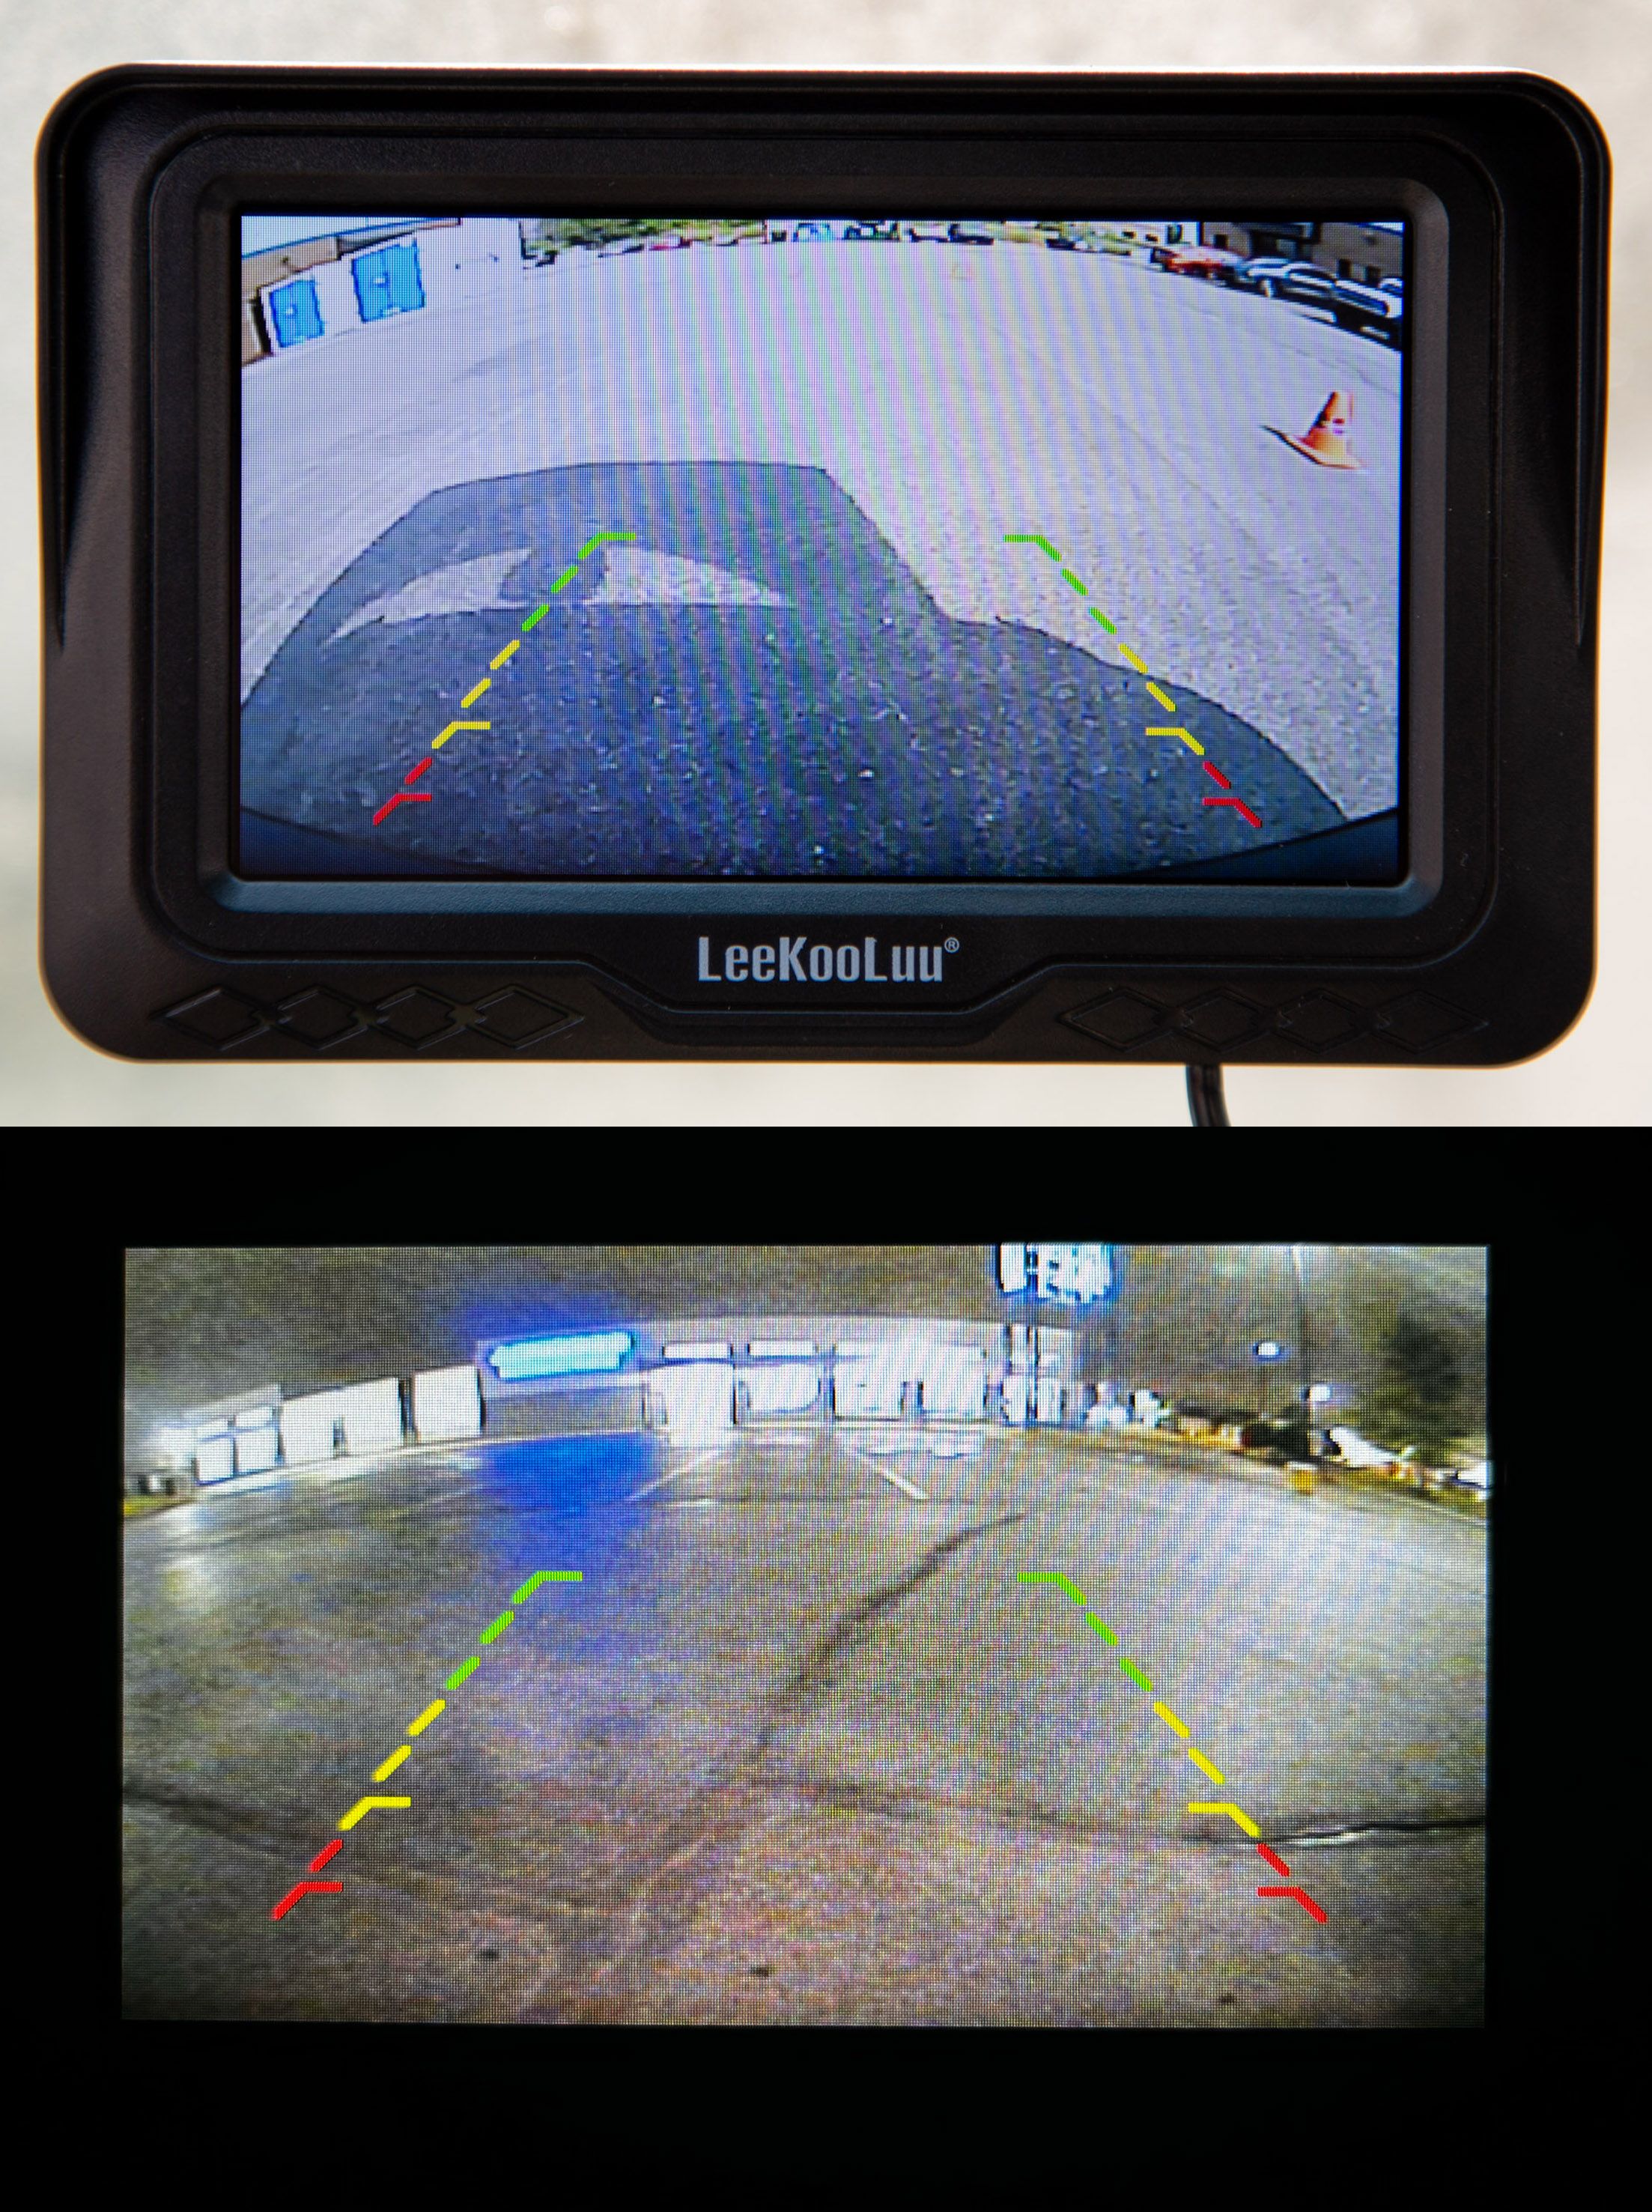 BEST WIRELESS Backup Camera!! (Trust me, I have tried a lot!) 